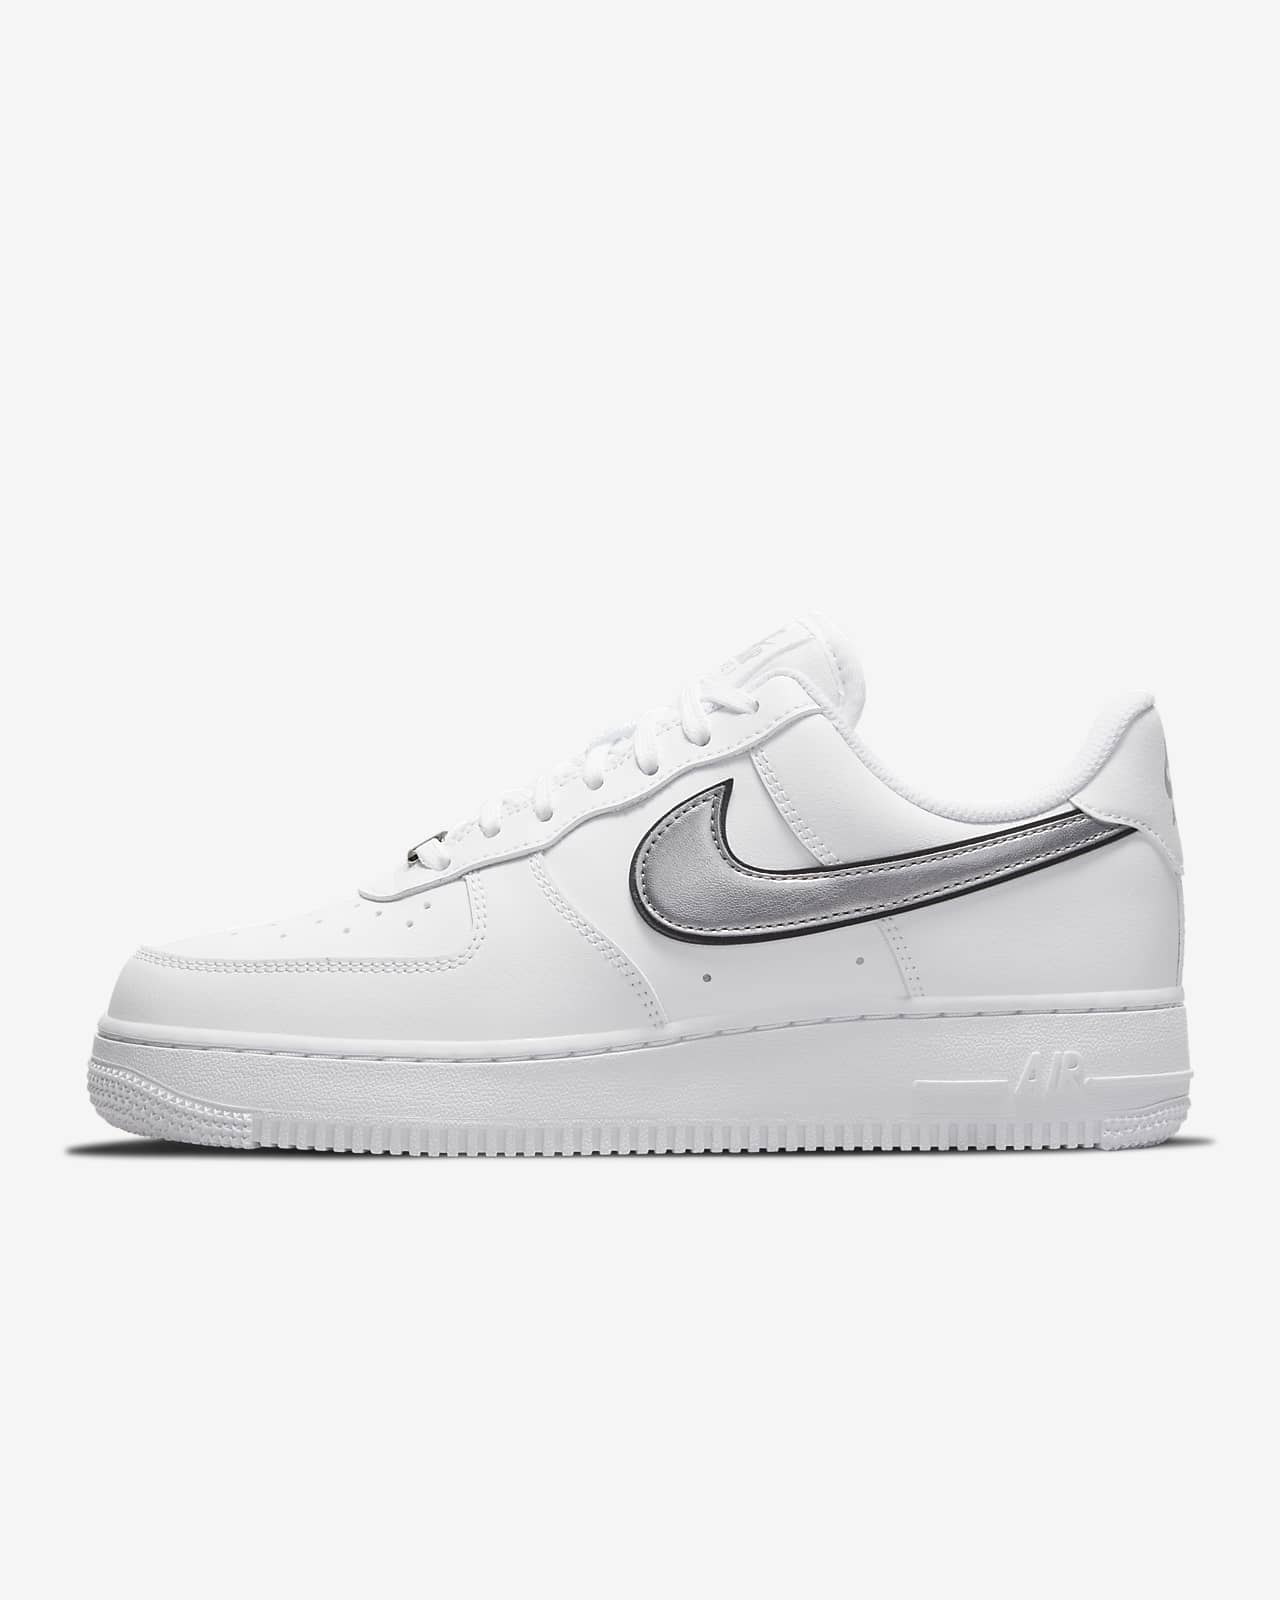 Chaussures Nike Air Force 1 '07 Essential pour Femme. Nike LU